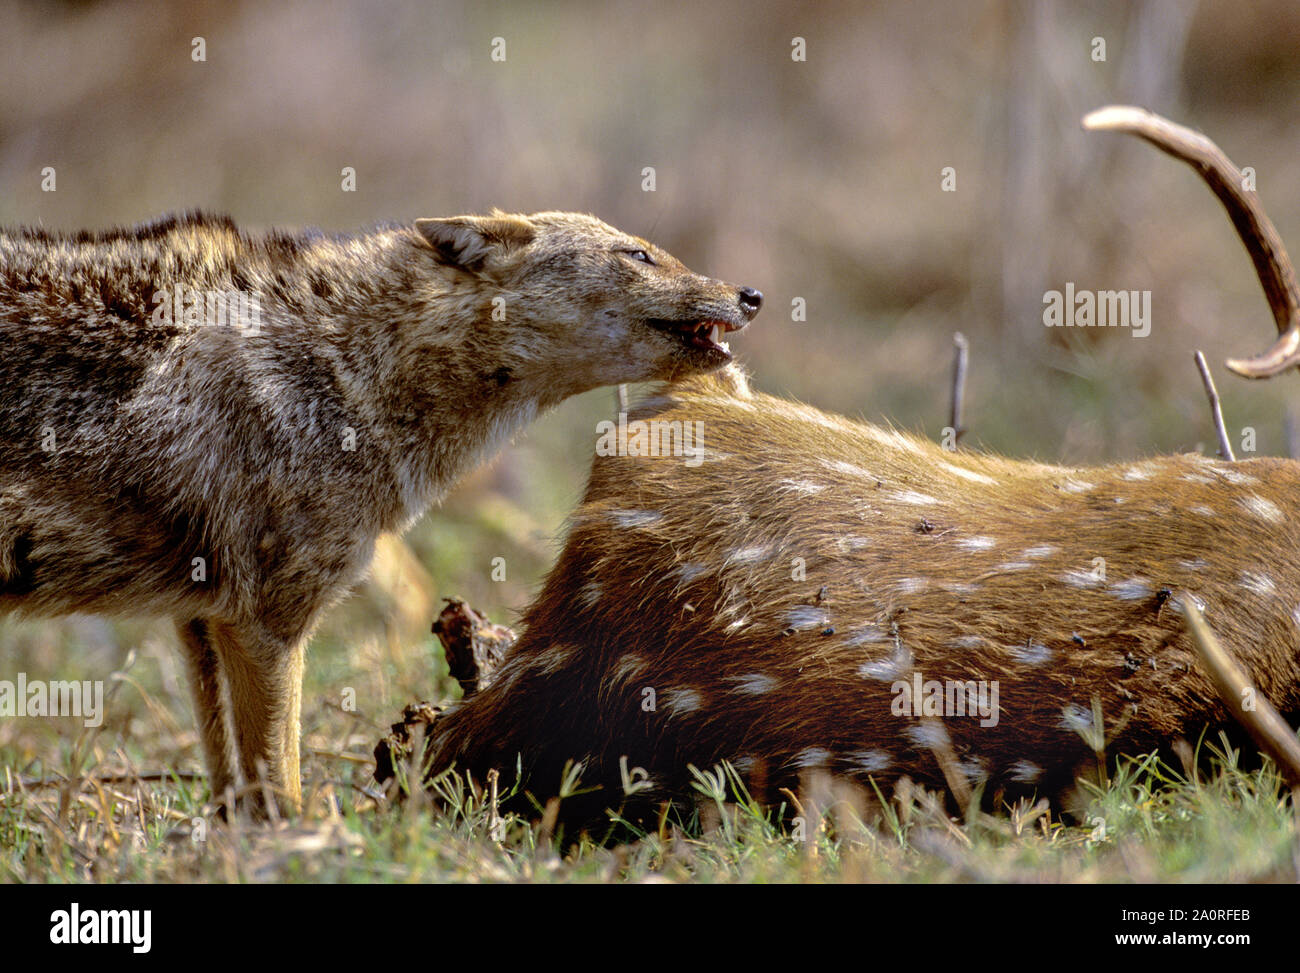 Indian Jackal, Canis aureus indicus, scavenging on Spotted Deer or Chital, Axis axis, Bharatpur, Rajasthan, India Stock Photo